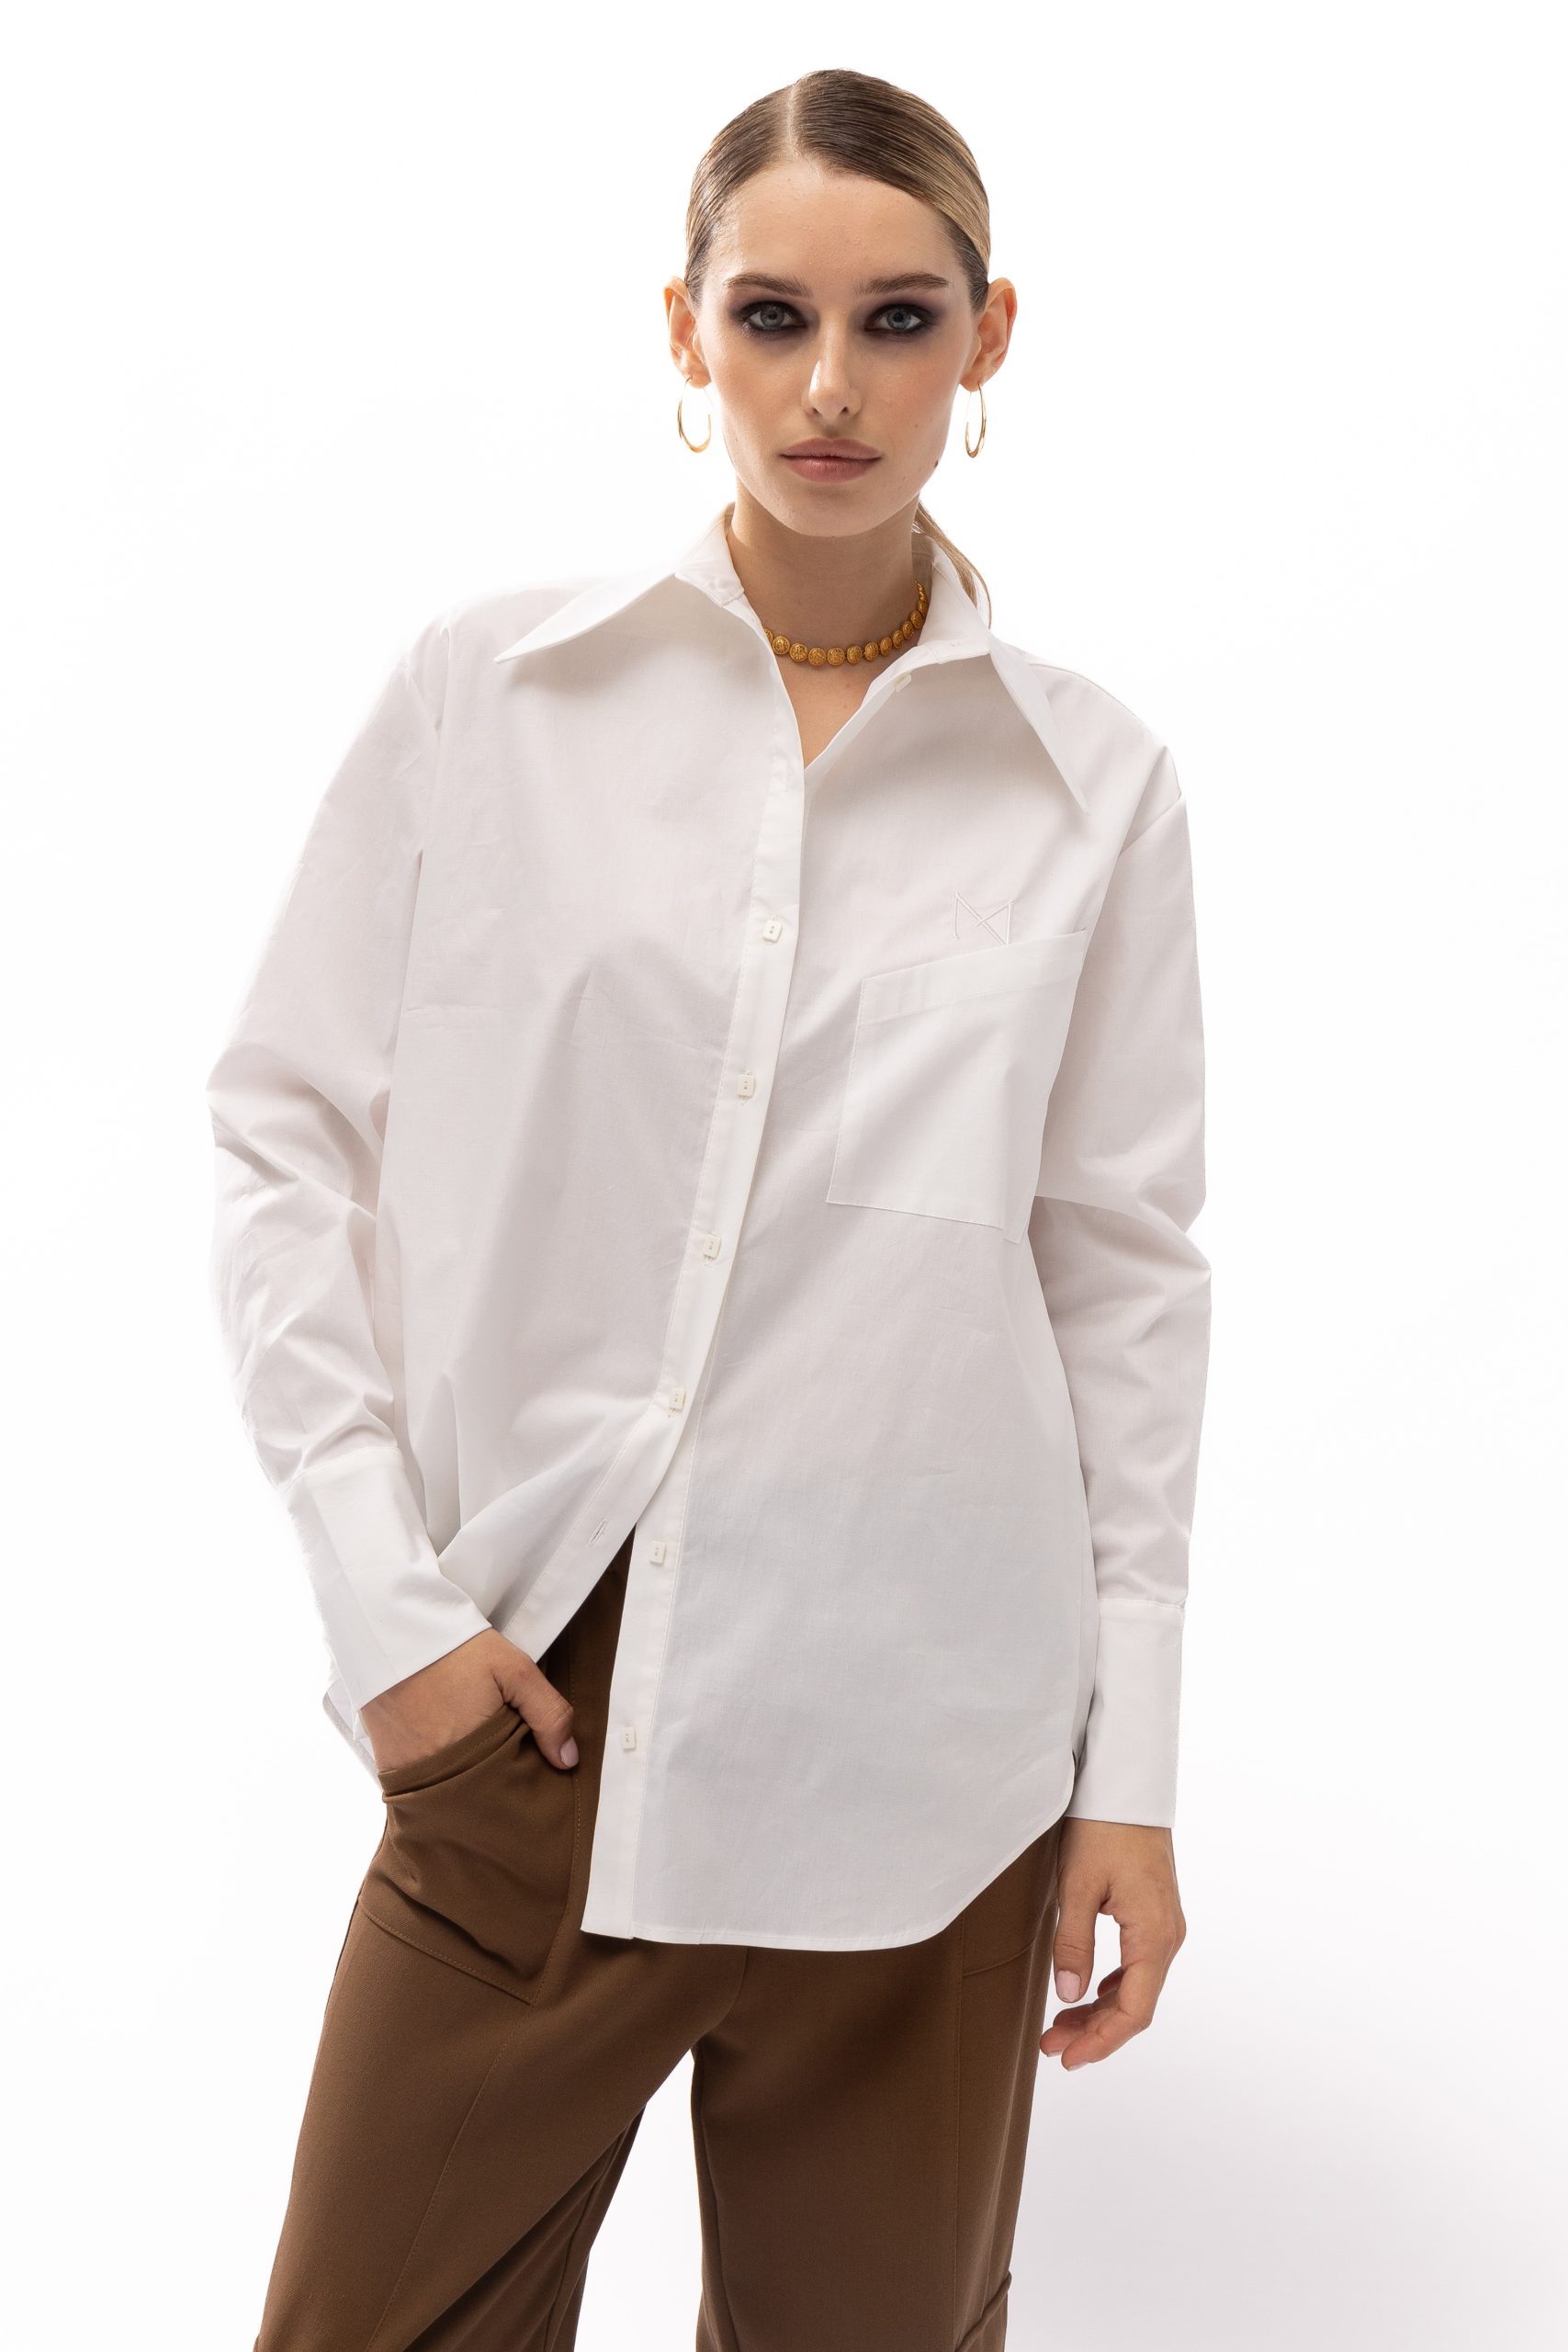 Cosmo White Shirt - Mallory The Label